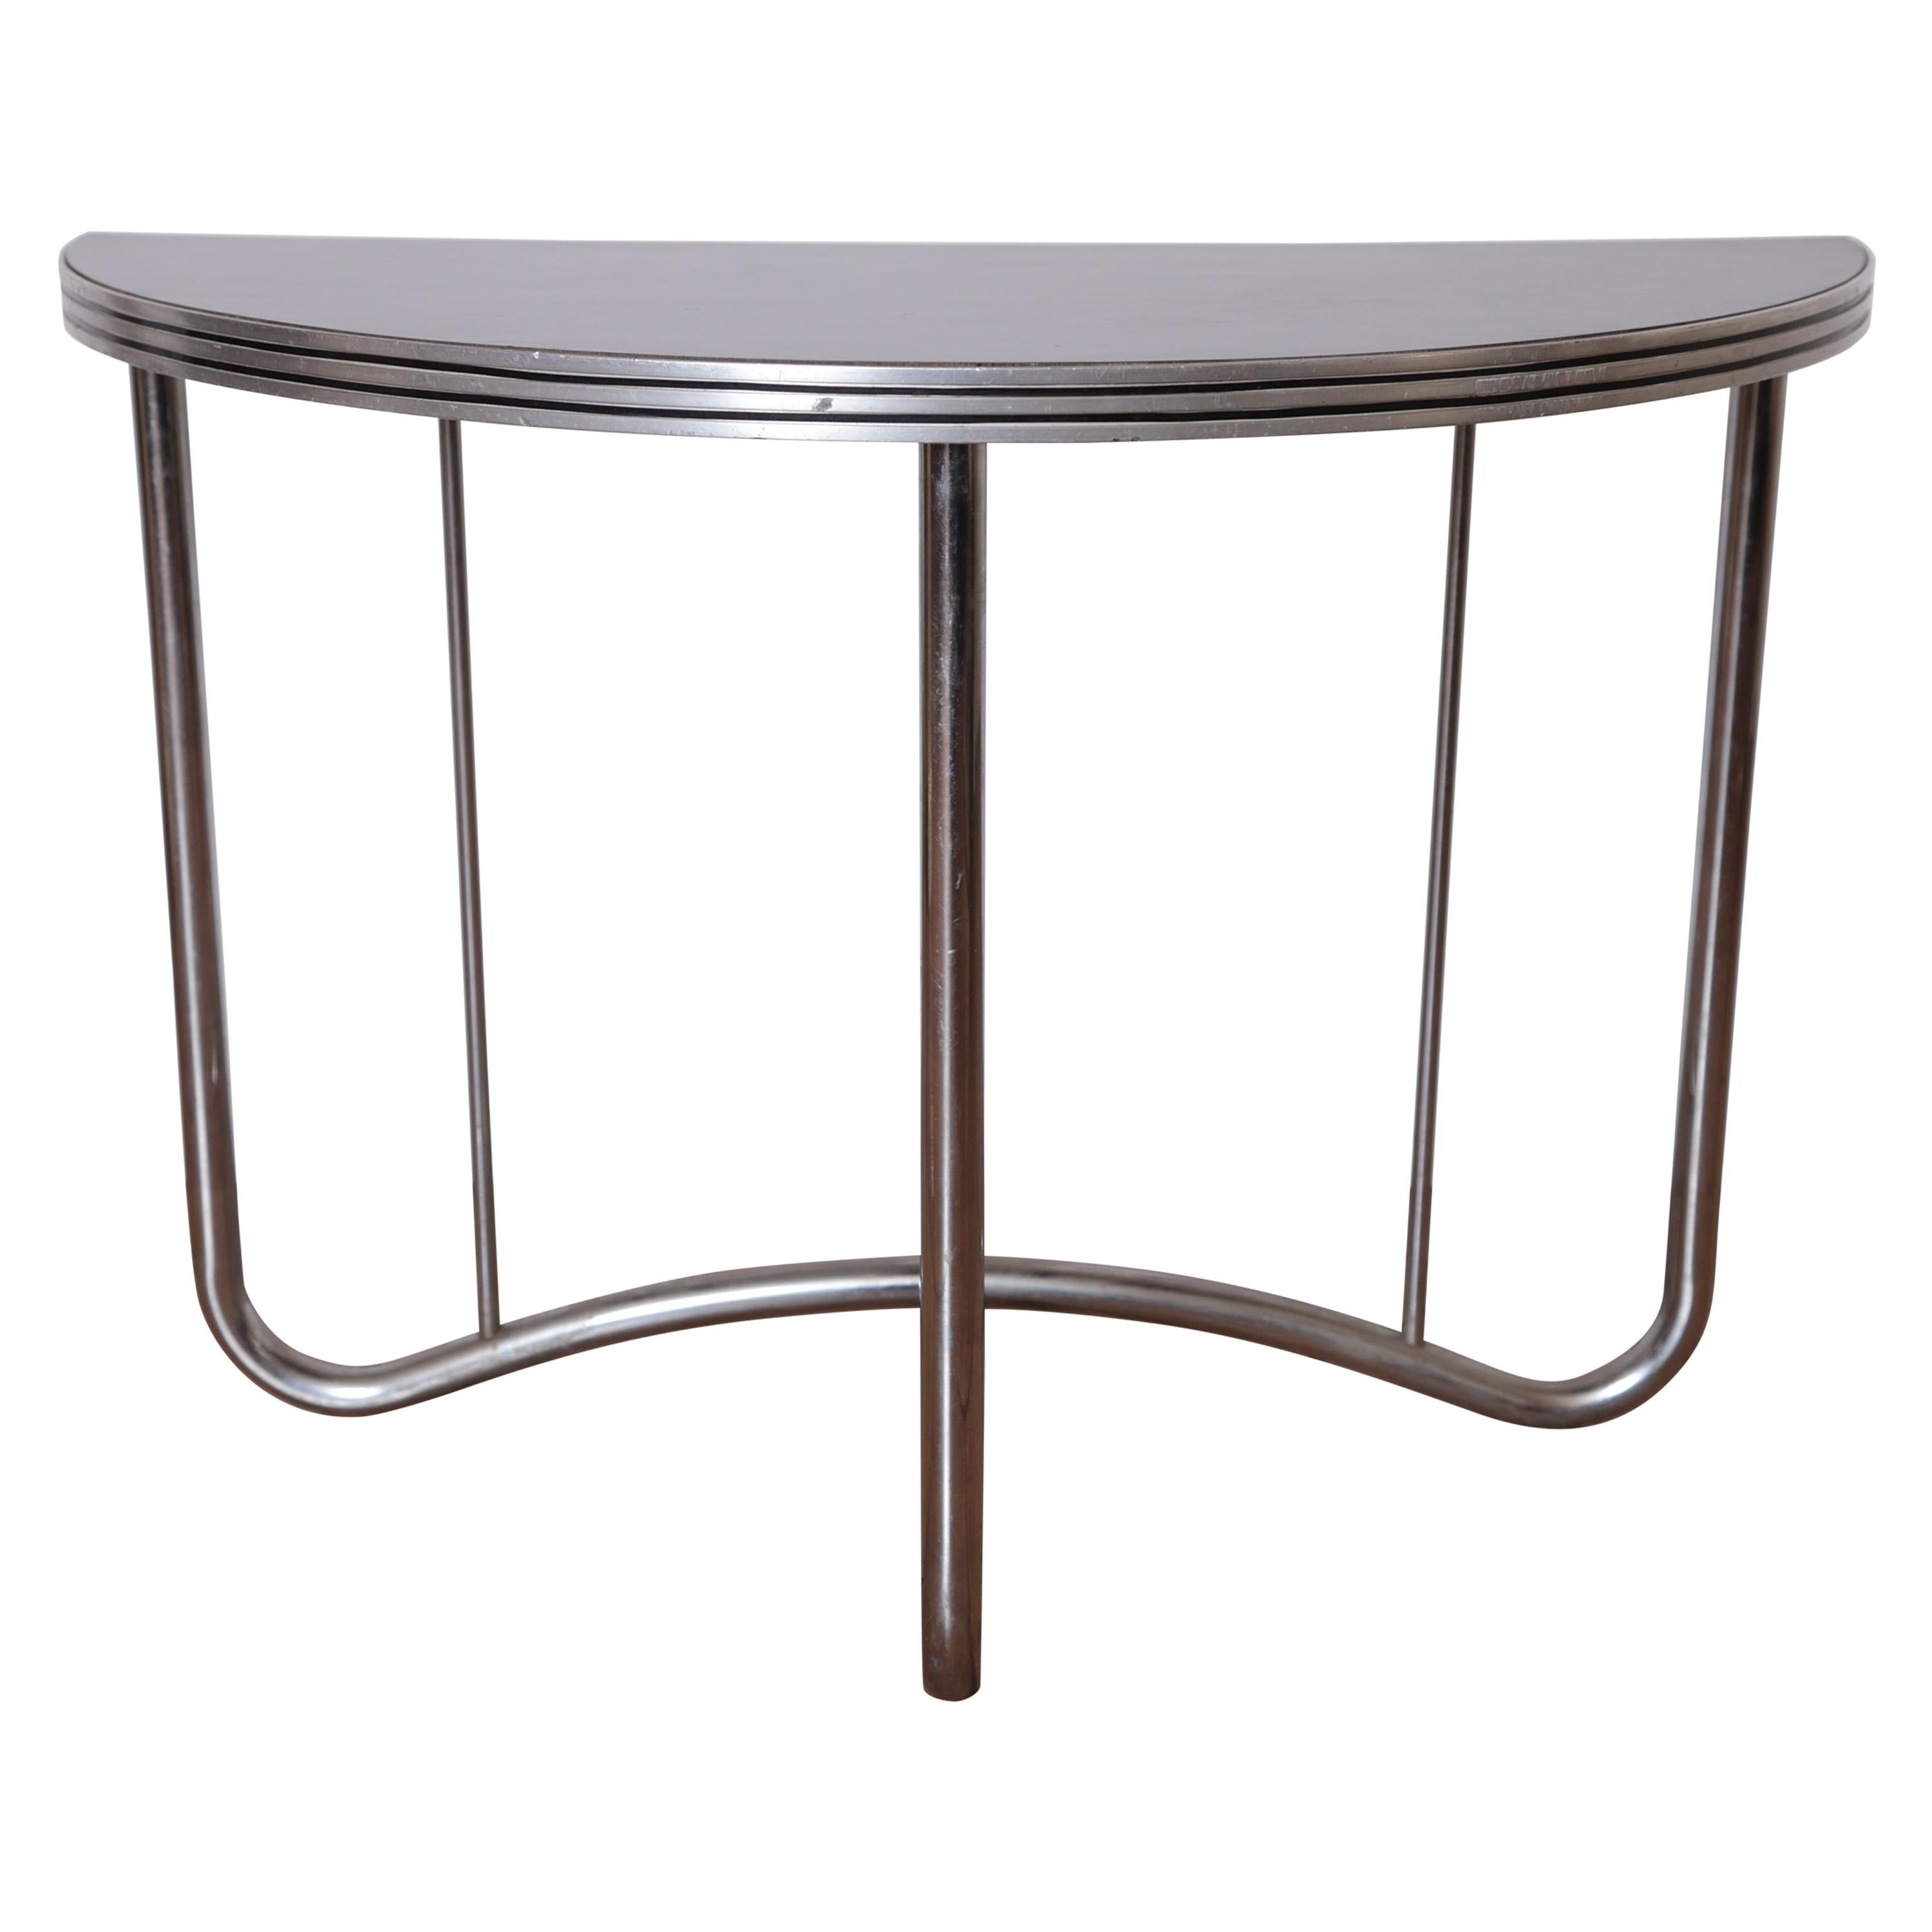 Art Deco Machine Age Manner of Wolfgang Hoffmann Demi, Lune Side End Table For Sale